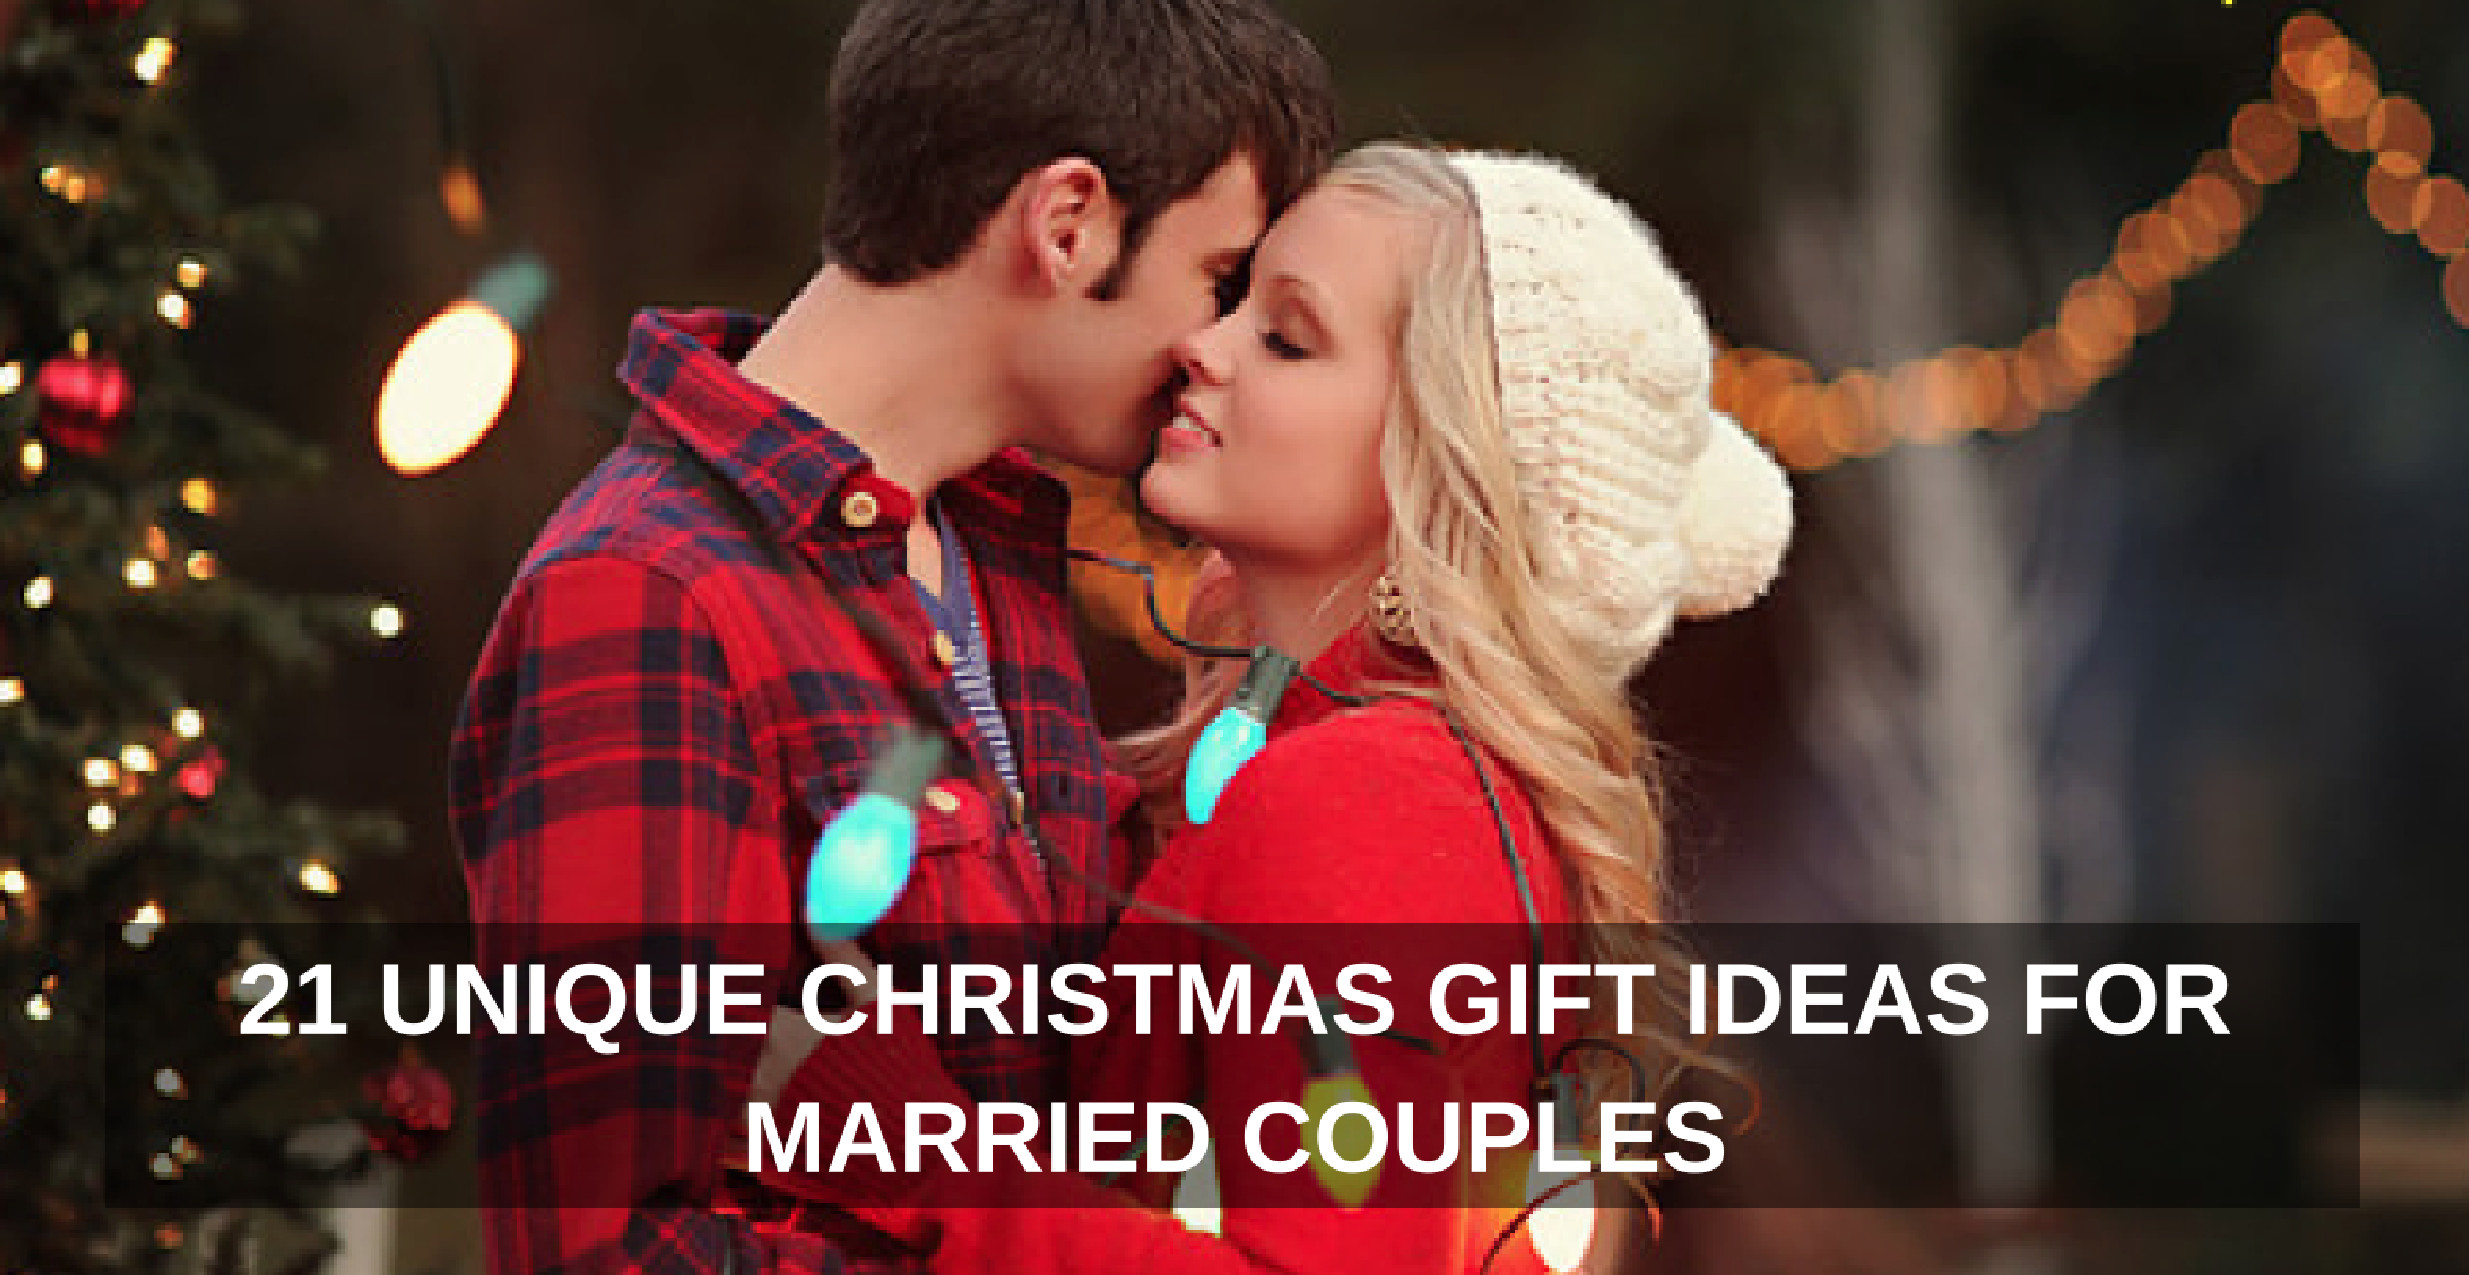 Gift Ideas For Couples Christmas
 21 Unique Christmas Gift Ideas for Married Couples